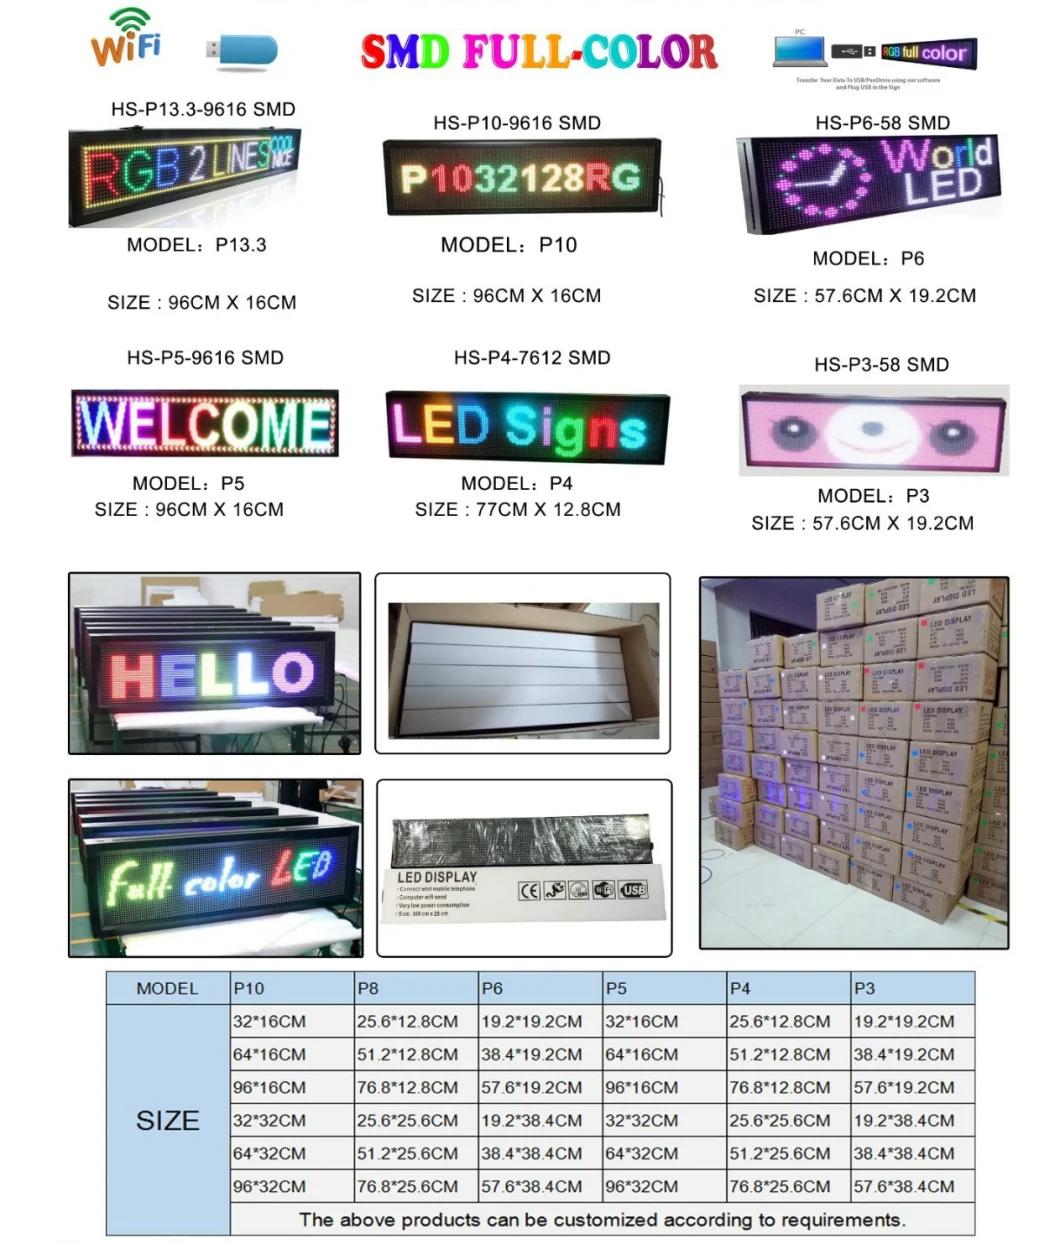 Multi-Functional LED Display That Can Switch Between Words by Connecting to WiFi,